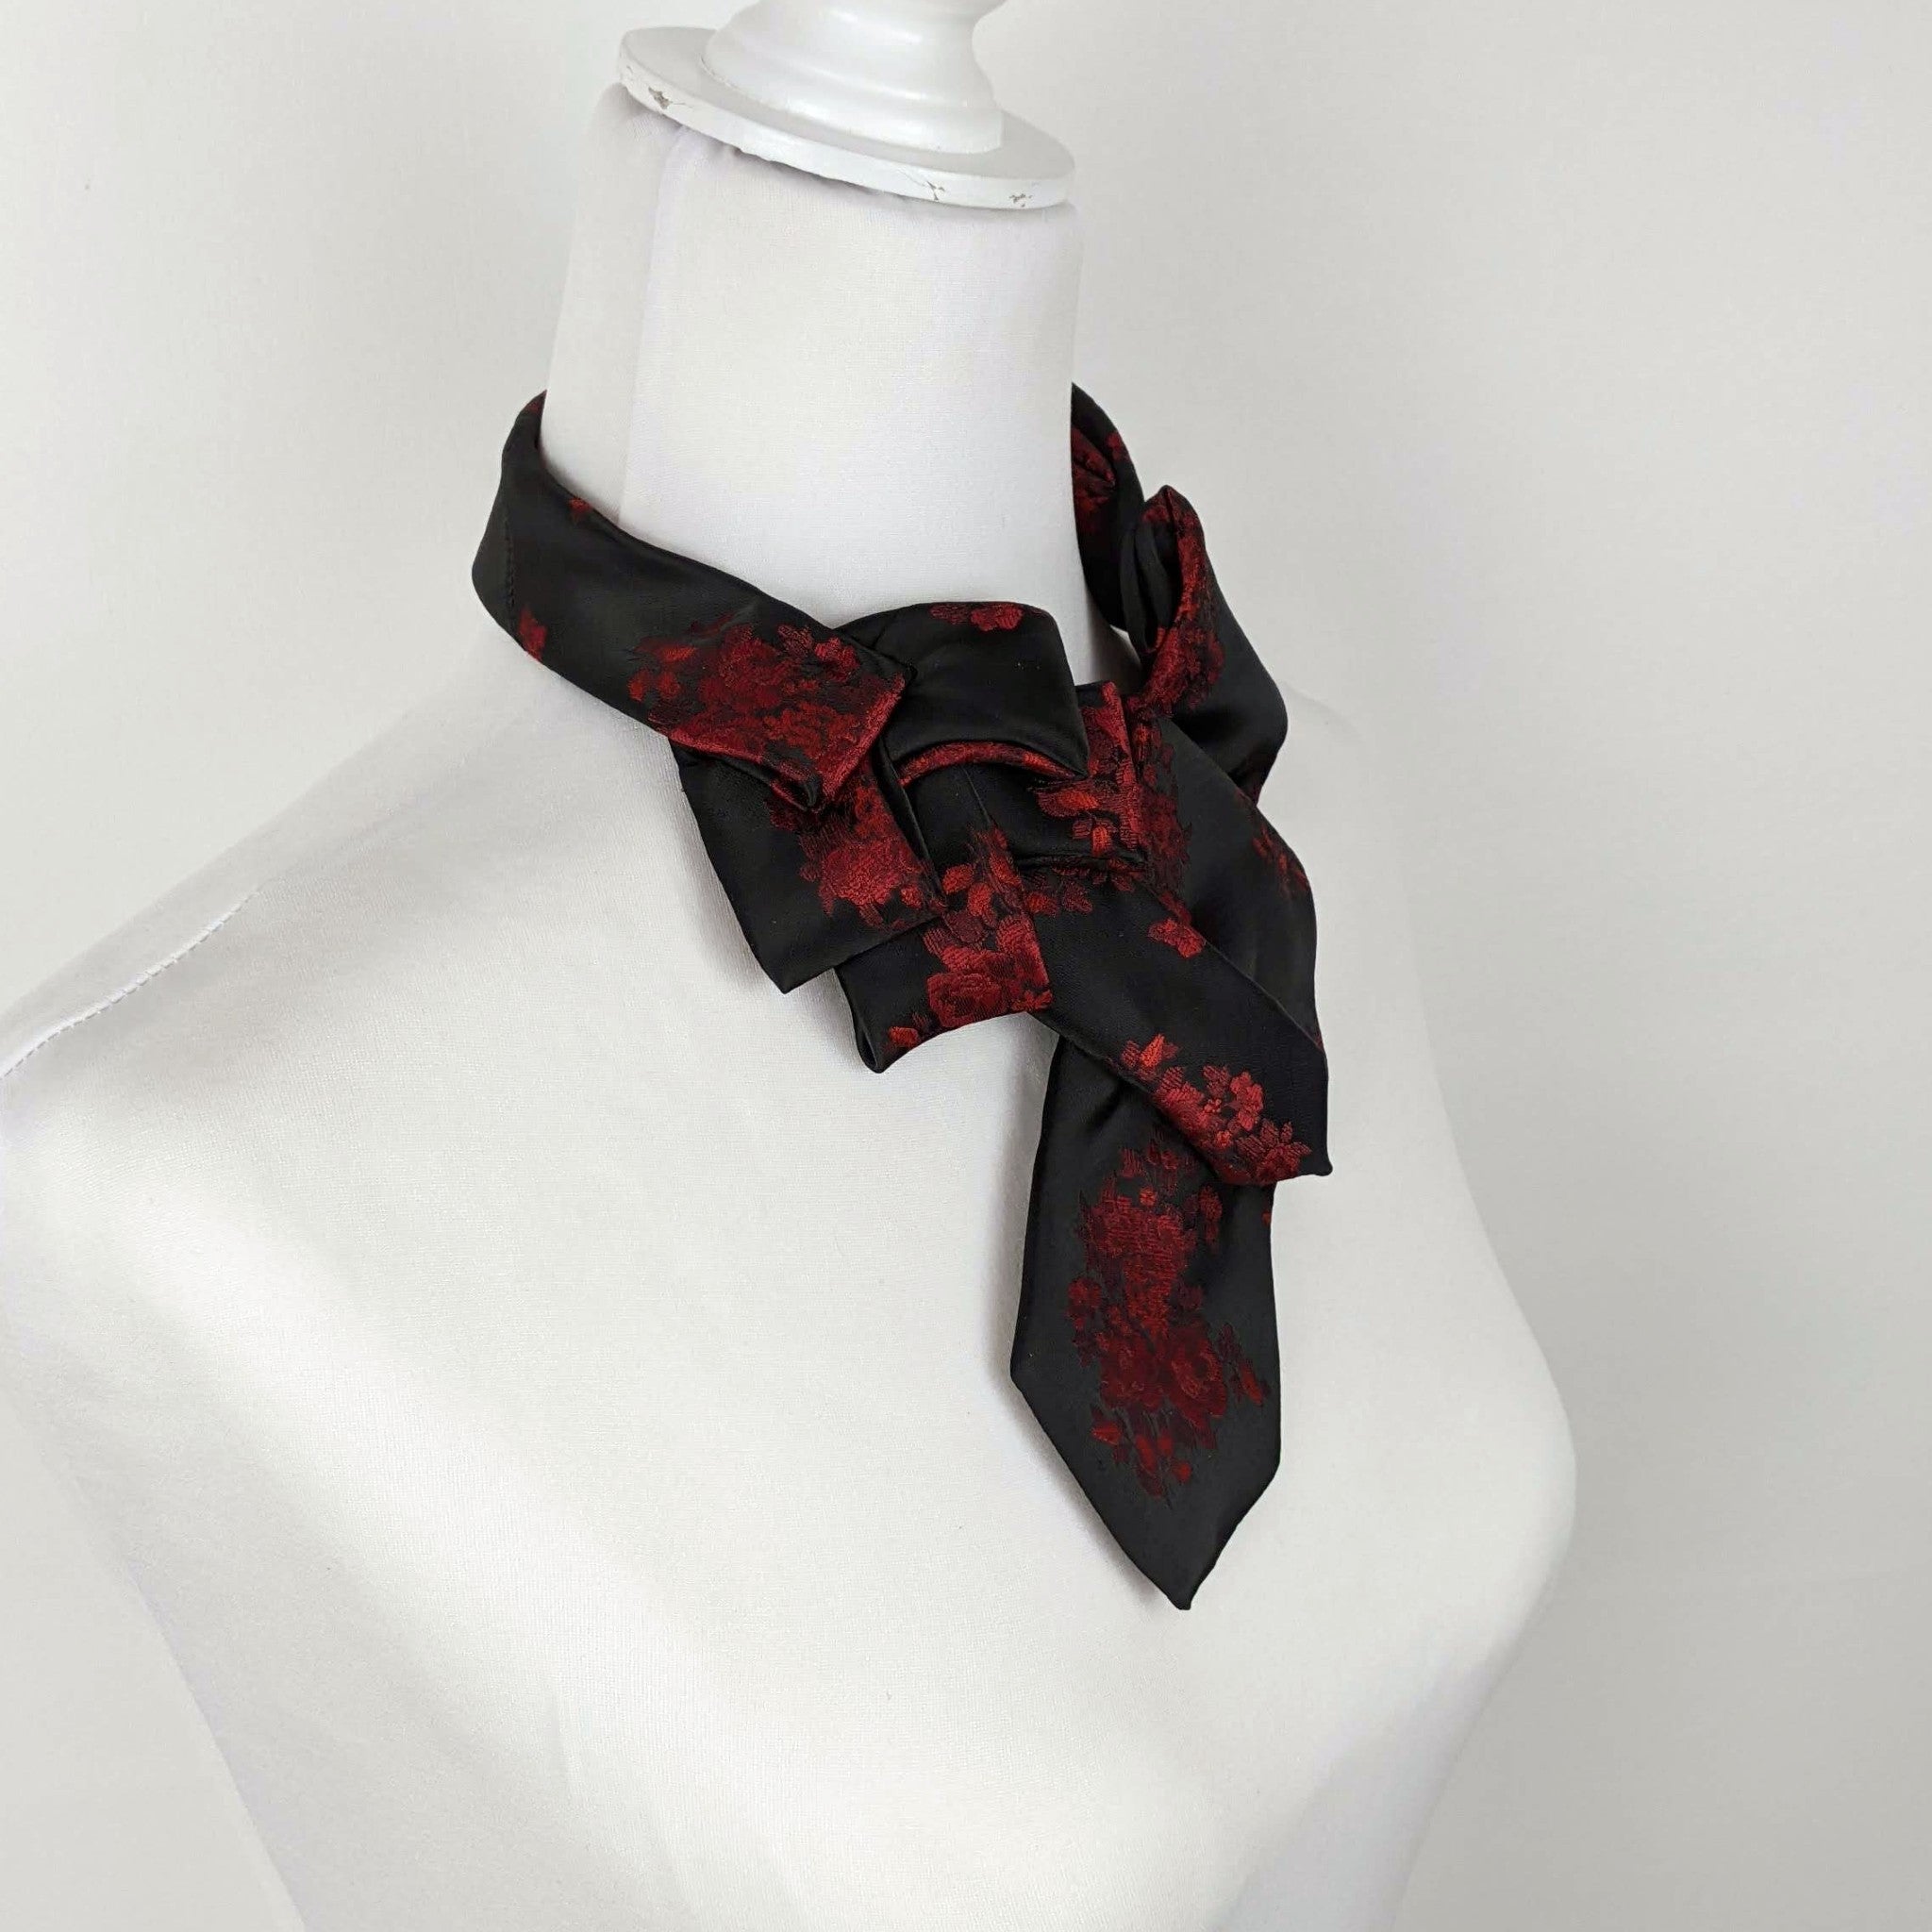 Women's Skinny Black Ascot Scarf With A Red Rose Print.